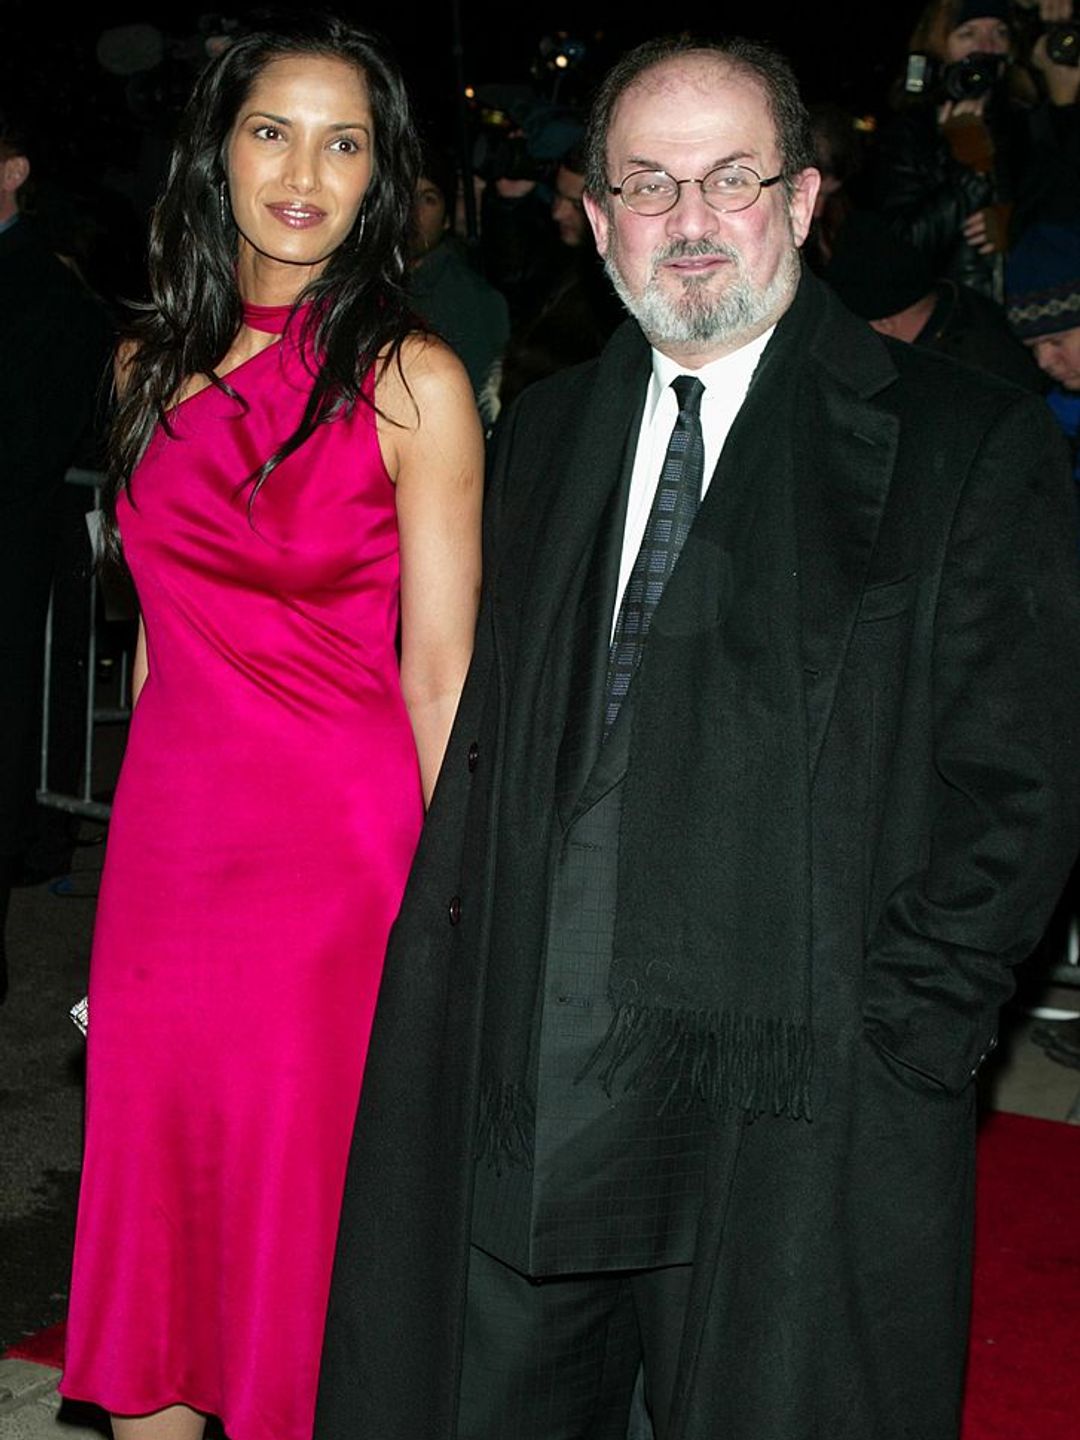 Padma Lakshmi wearing a pink satin dress as she holds hands with Salman Rushdie. 